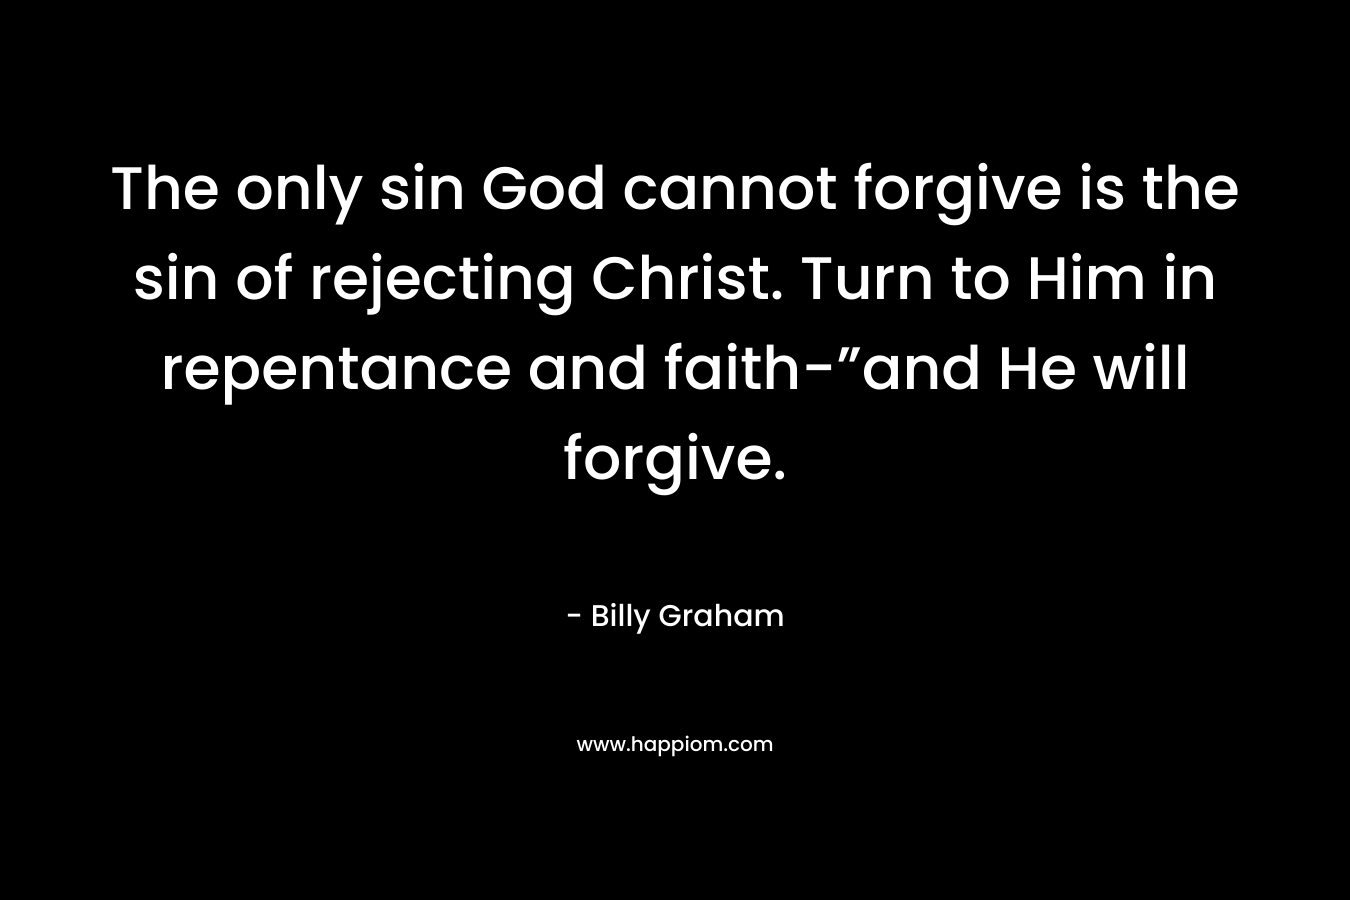 The only sin God cannot forgive is the sin of rejecting Christ. Turn to Him in repentance and faith-”and He will forgive.